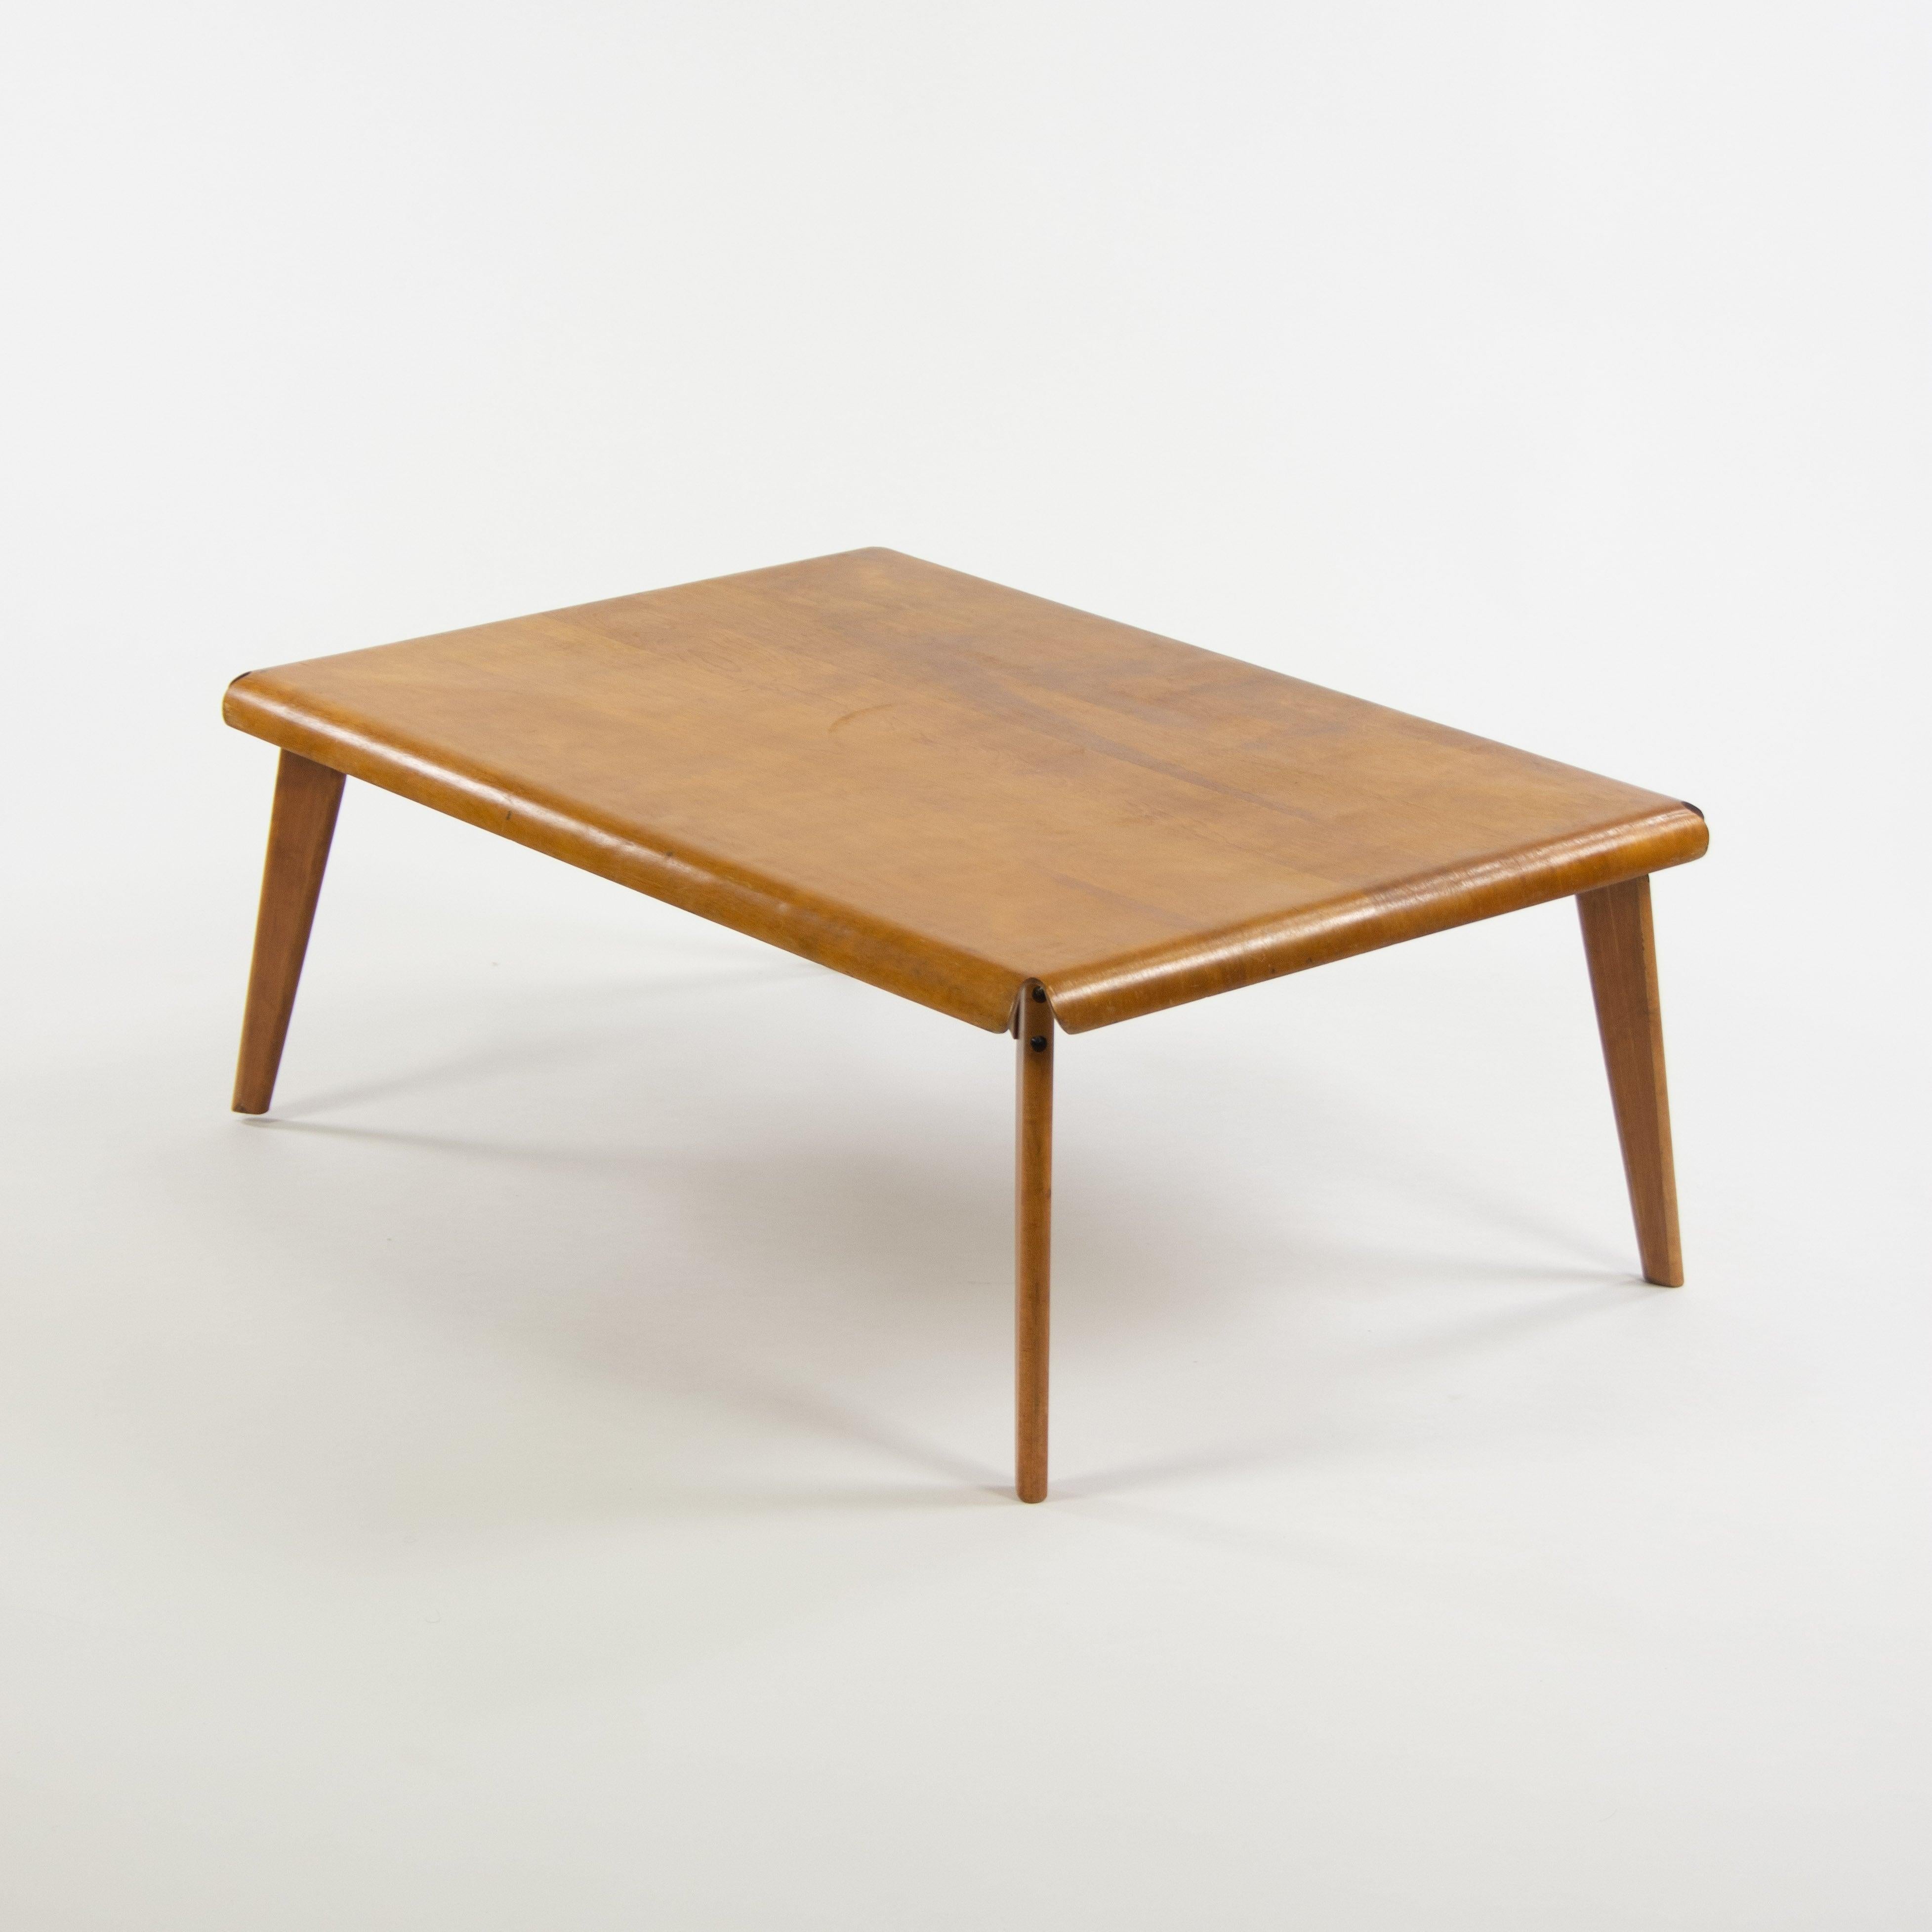 Listed for sale is a very rare and early Evans plywood coffee table, produced by Evans Molded Plywood Division and designed by and with Charles and Ray Eames.

Two or so of these tables have surfaced to market in recent years, notably at Wright